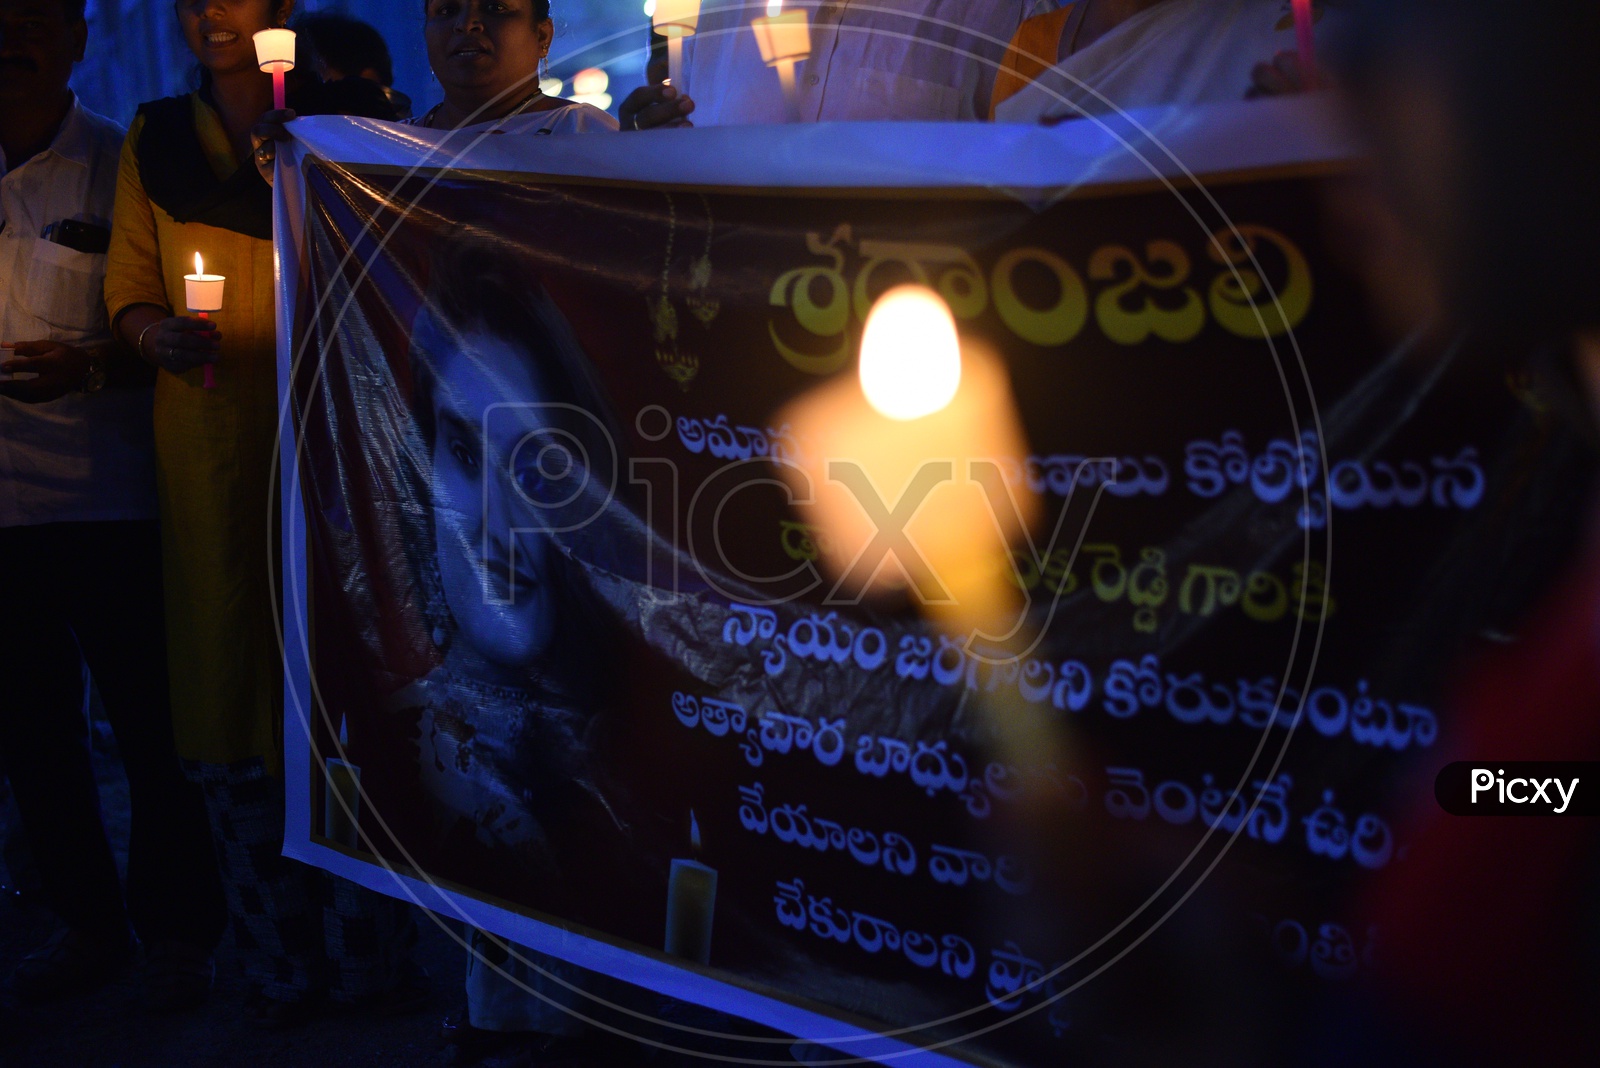 Candle March Or Candle Light Rally By KPHB Residents Protesting  Against Hyderabad Veterinarian Doctor Priyanka Reddy  Gang Rape And Murder at Shamshabad In Hyderabad